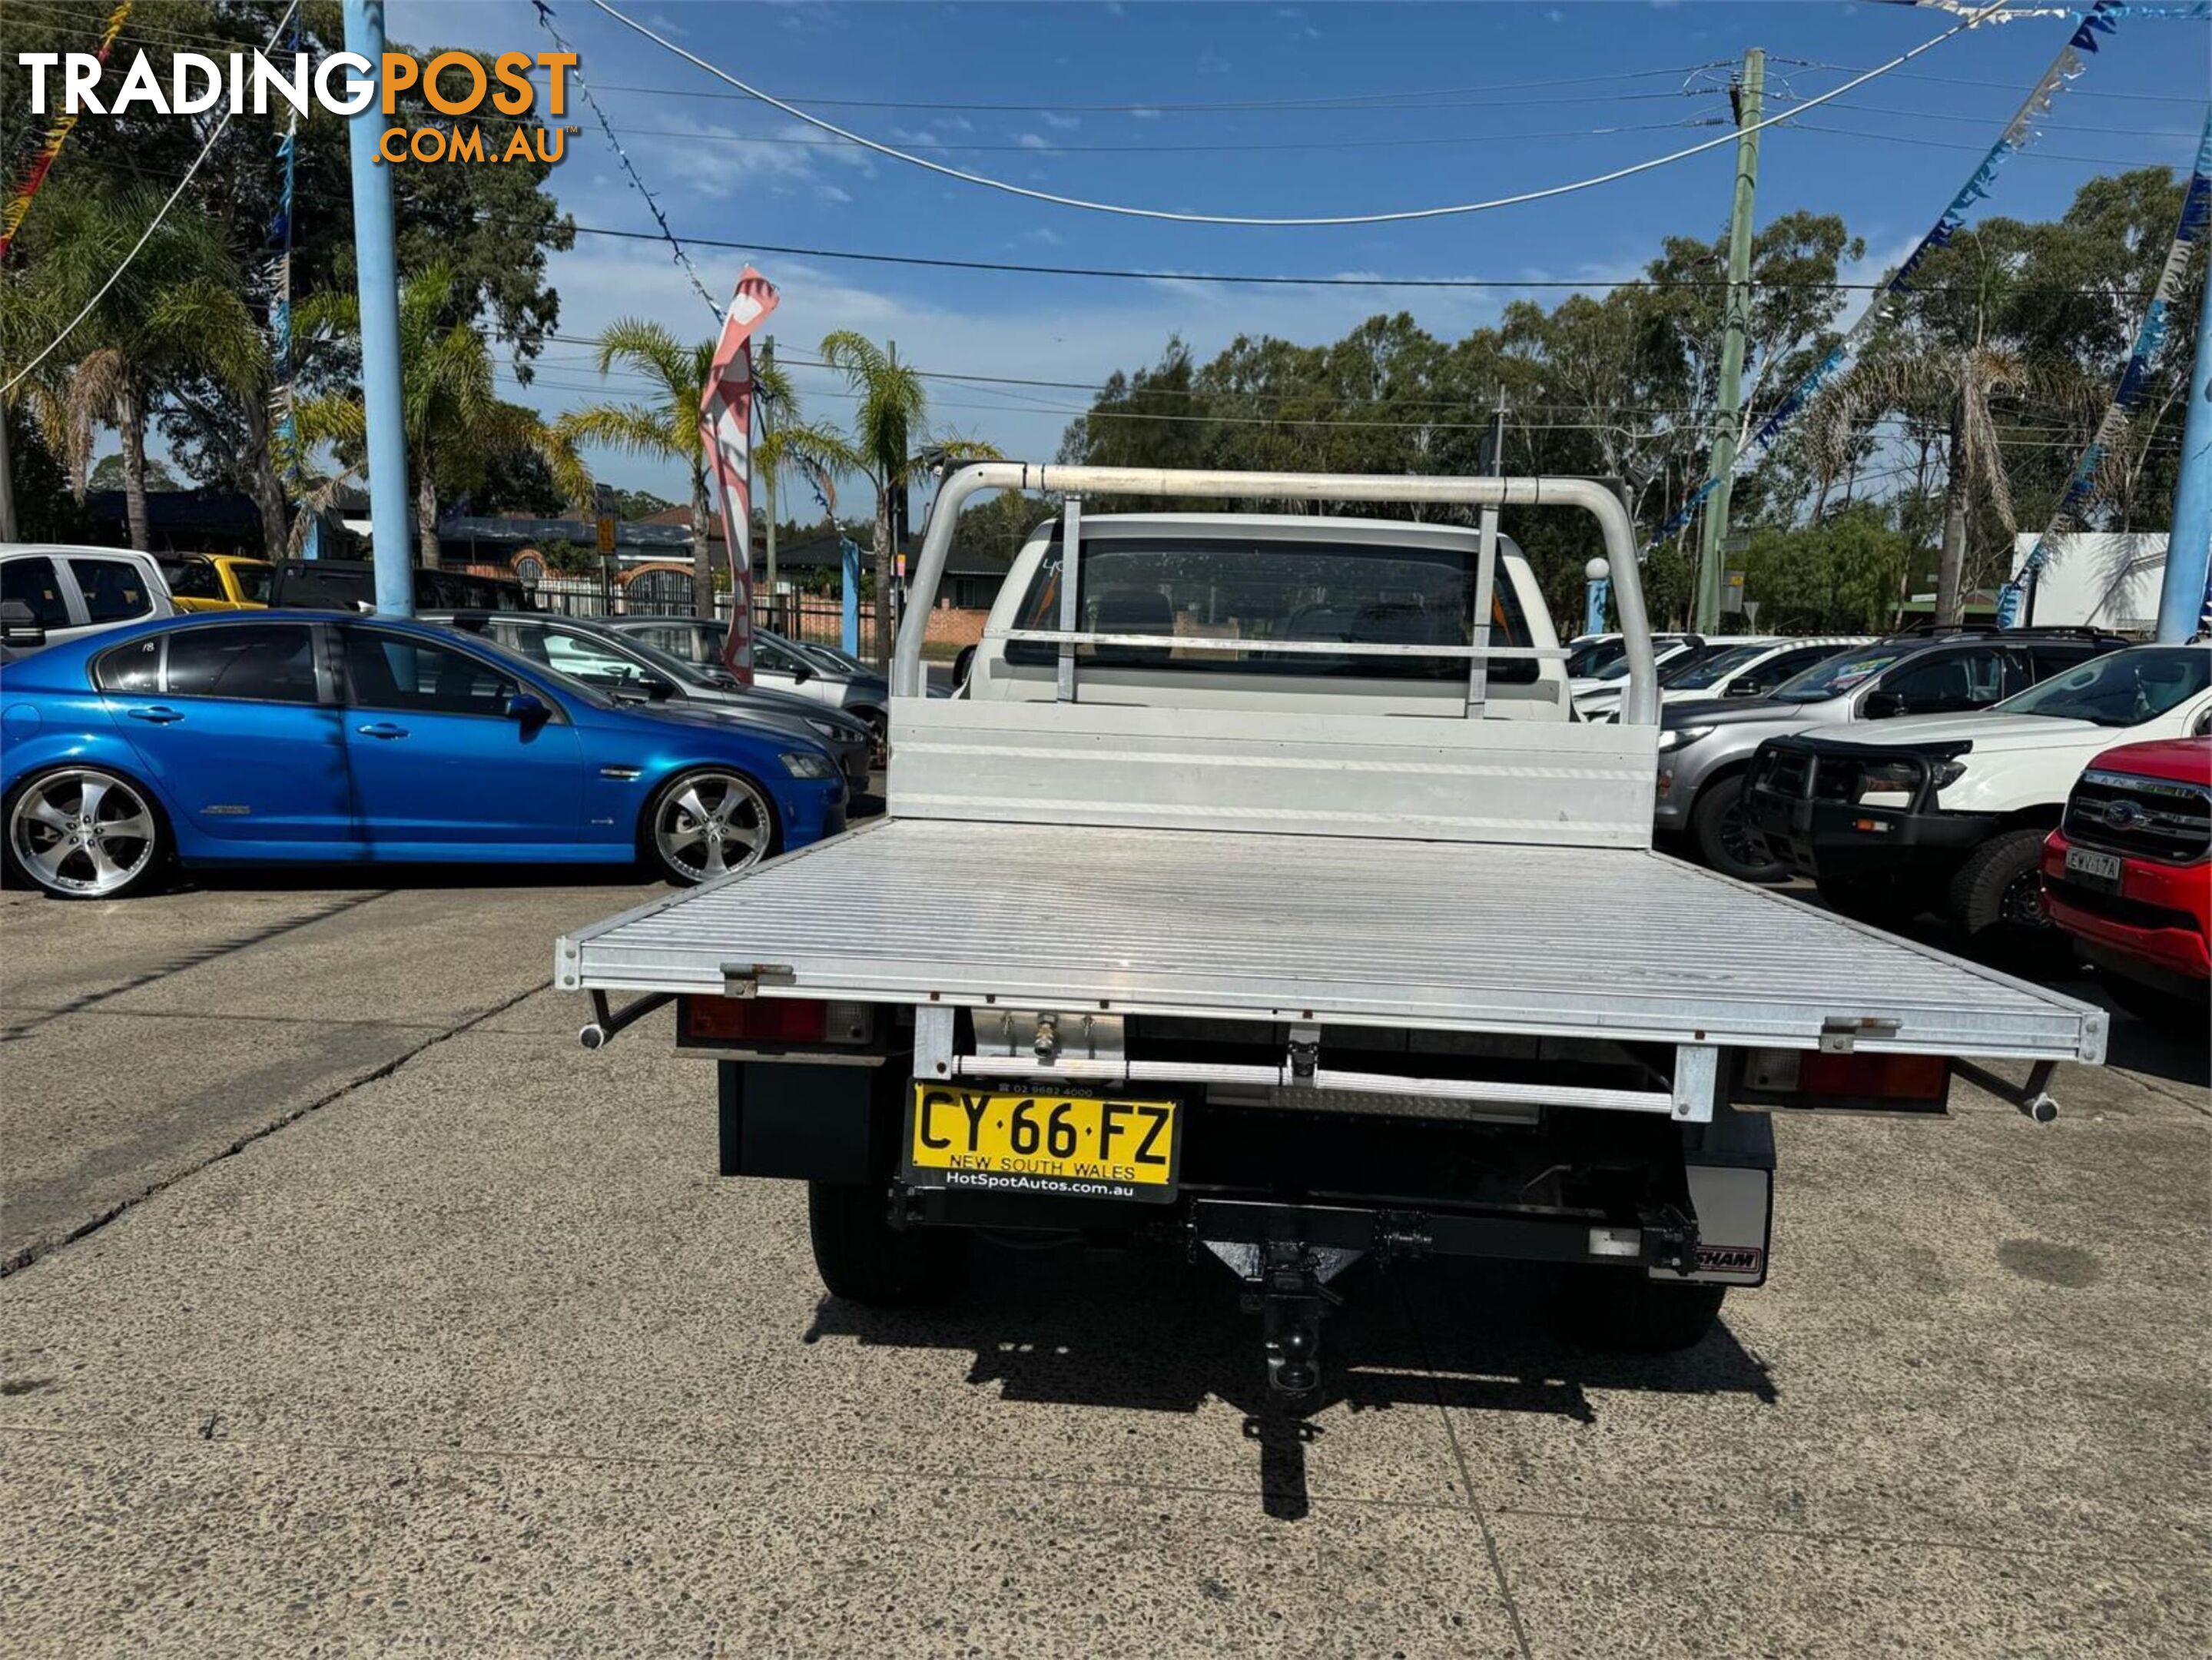 2016 FORD RANGER XLHI RIDER PXMKII CAB CHASSIS